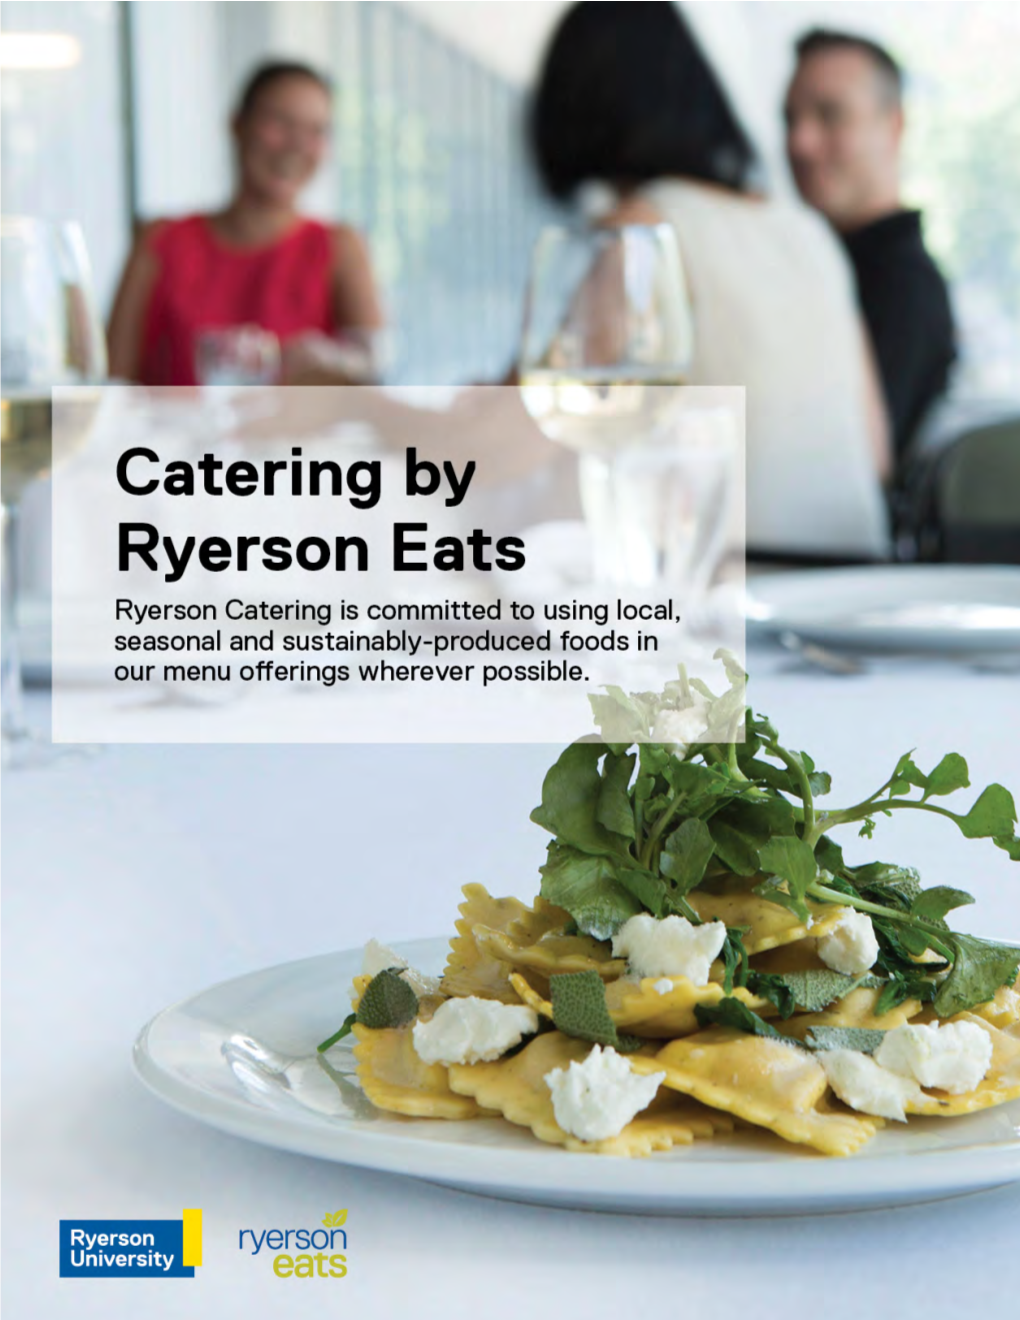 Catering by Ryerson Eats Ryerson Catering Is Committed to Using Local, Seasonal and Sustainably-Produced Foods in Our Meny Offerings Wherever Possible